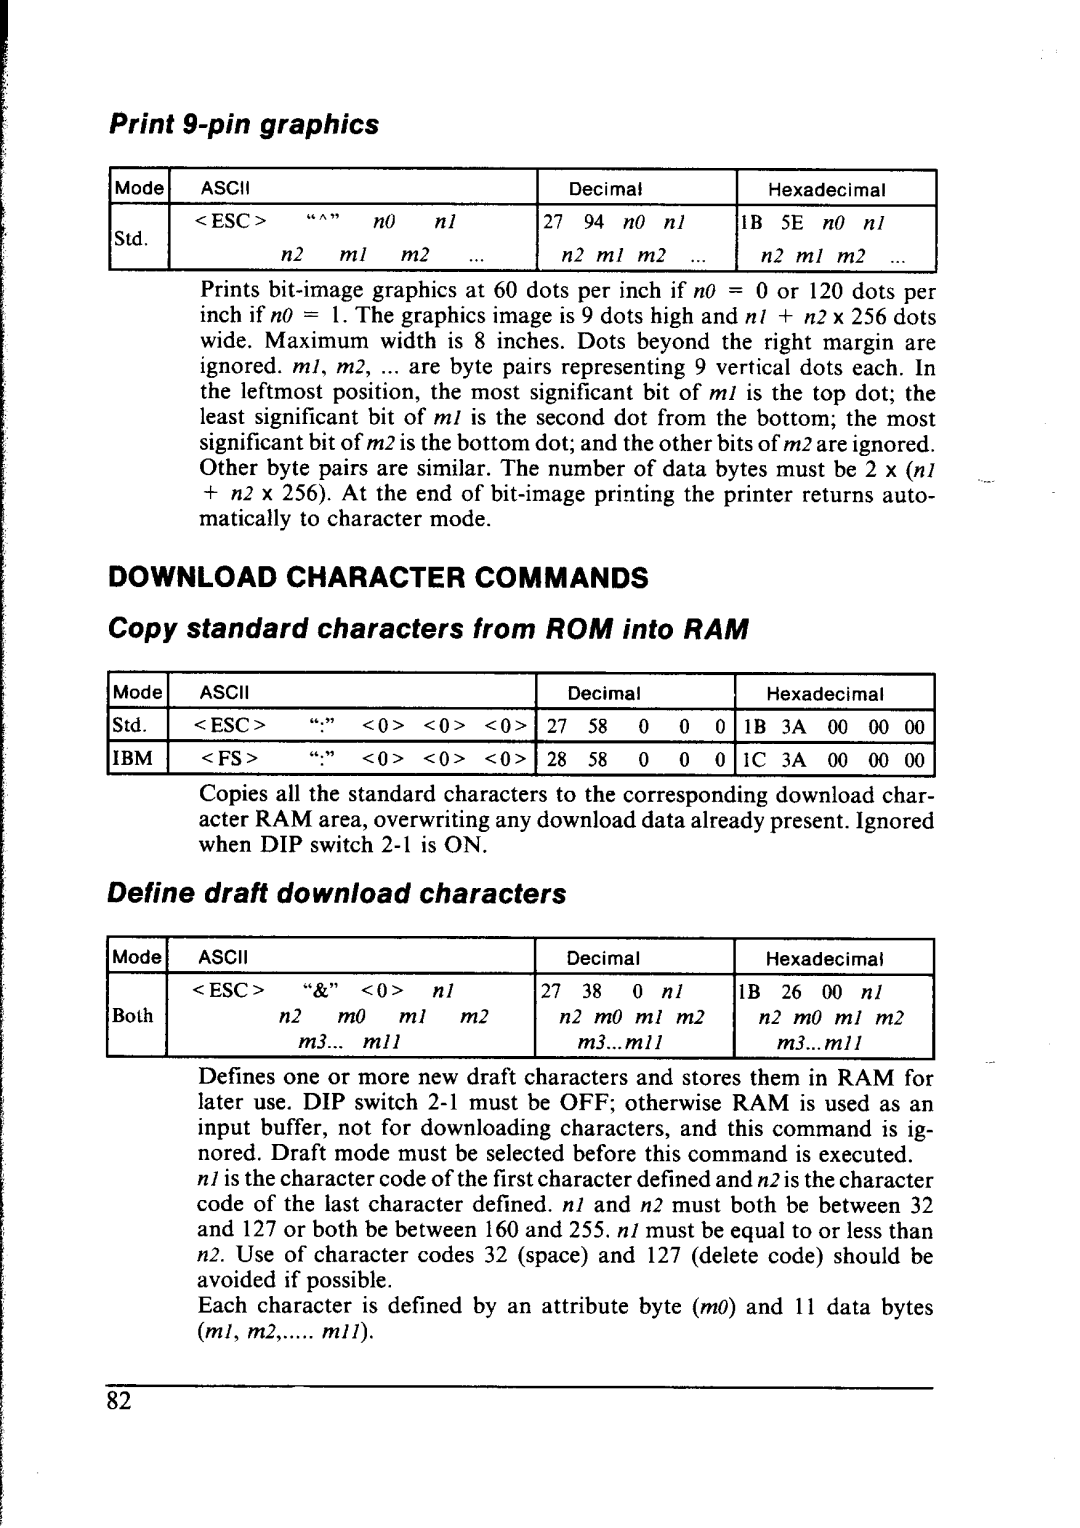 Star Micronics NX-1000 Print O-pin graphics, Copy standard characters from ROM into RAM, Define draft download characters 